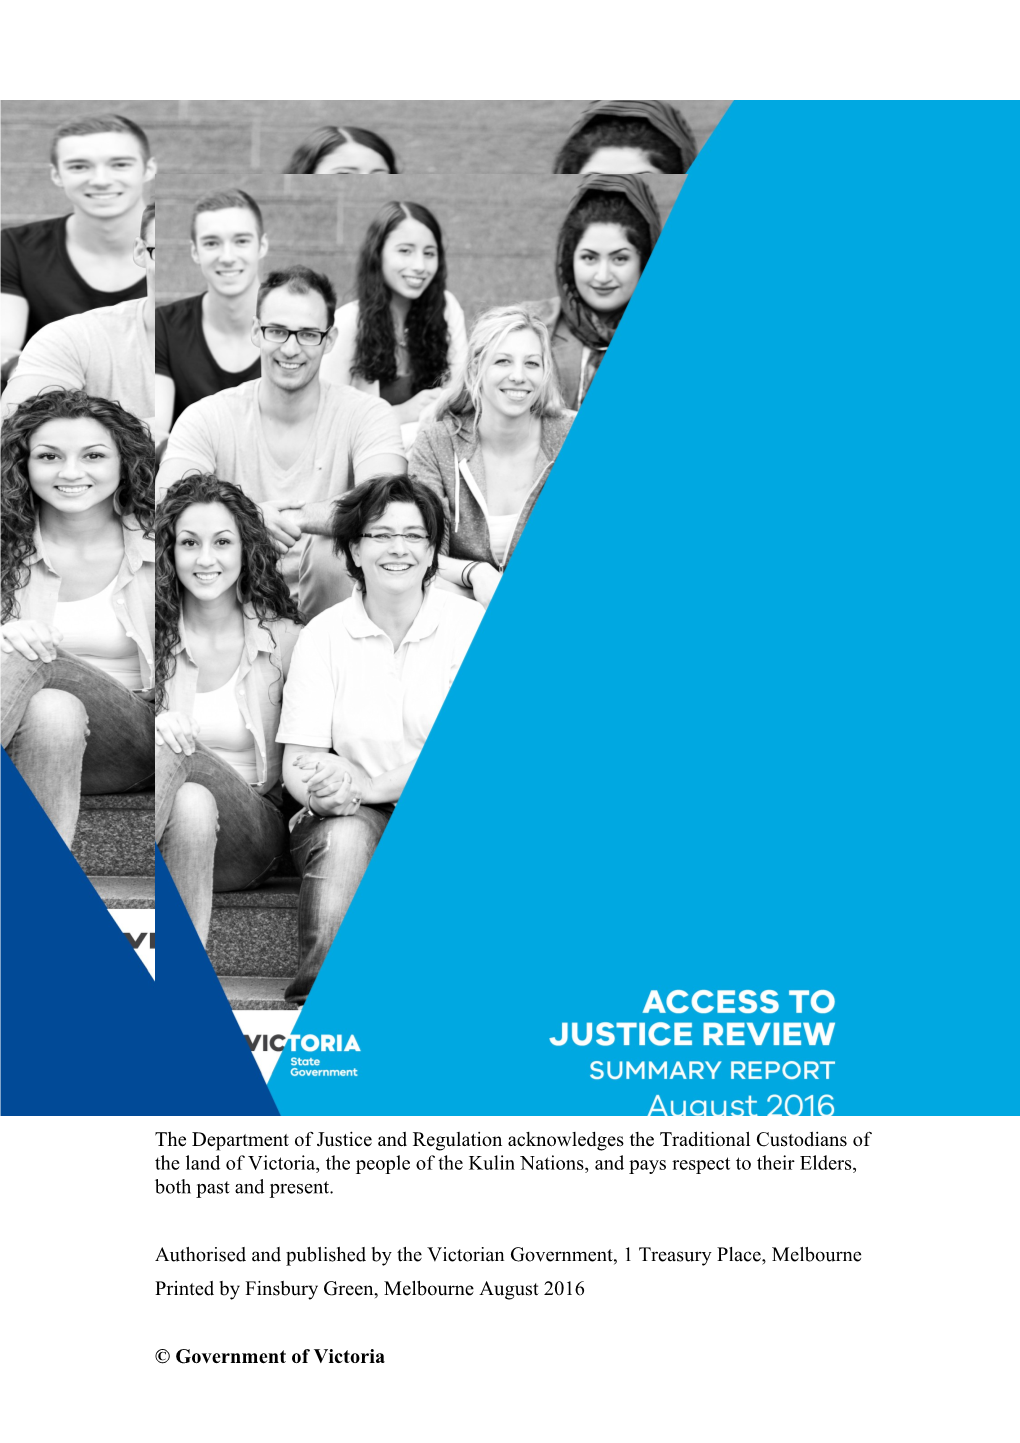 Access to Justice Review Summary Report